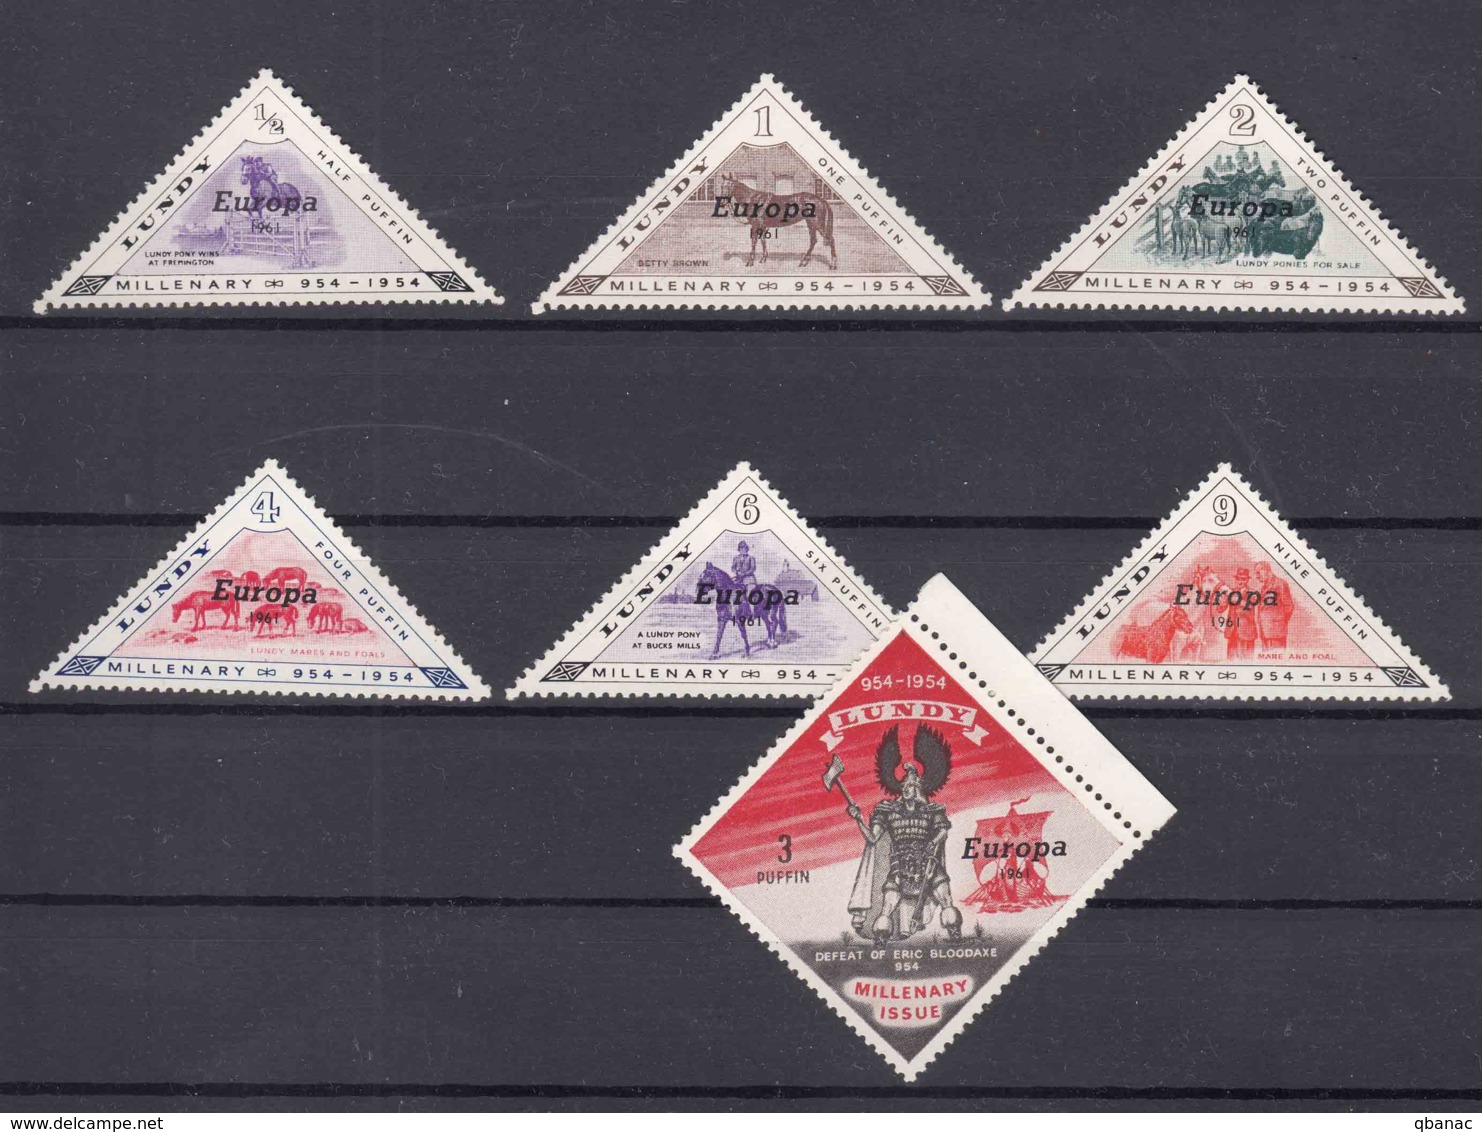 Great Britain Lundy 1961 Europa Private Issue, Horses, Mint Never Hinged - Ortsausgaben